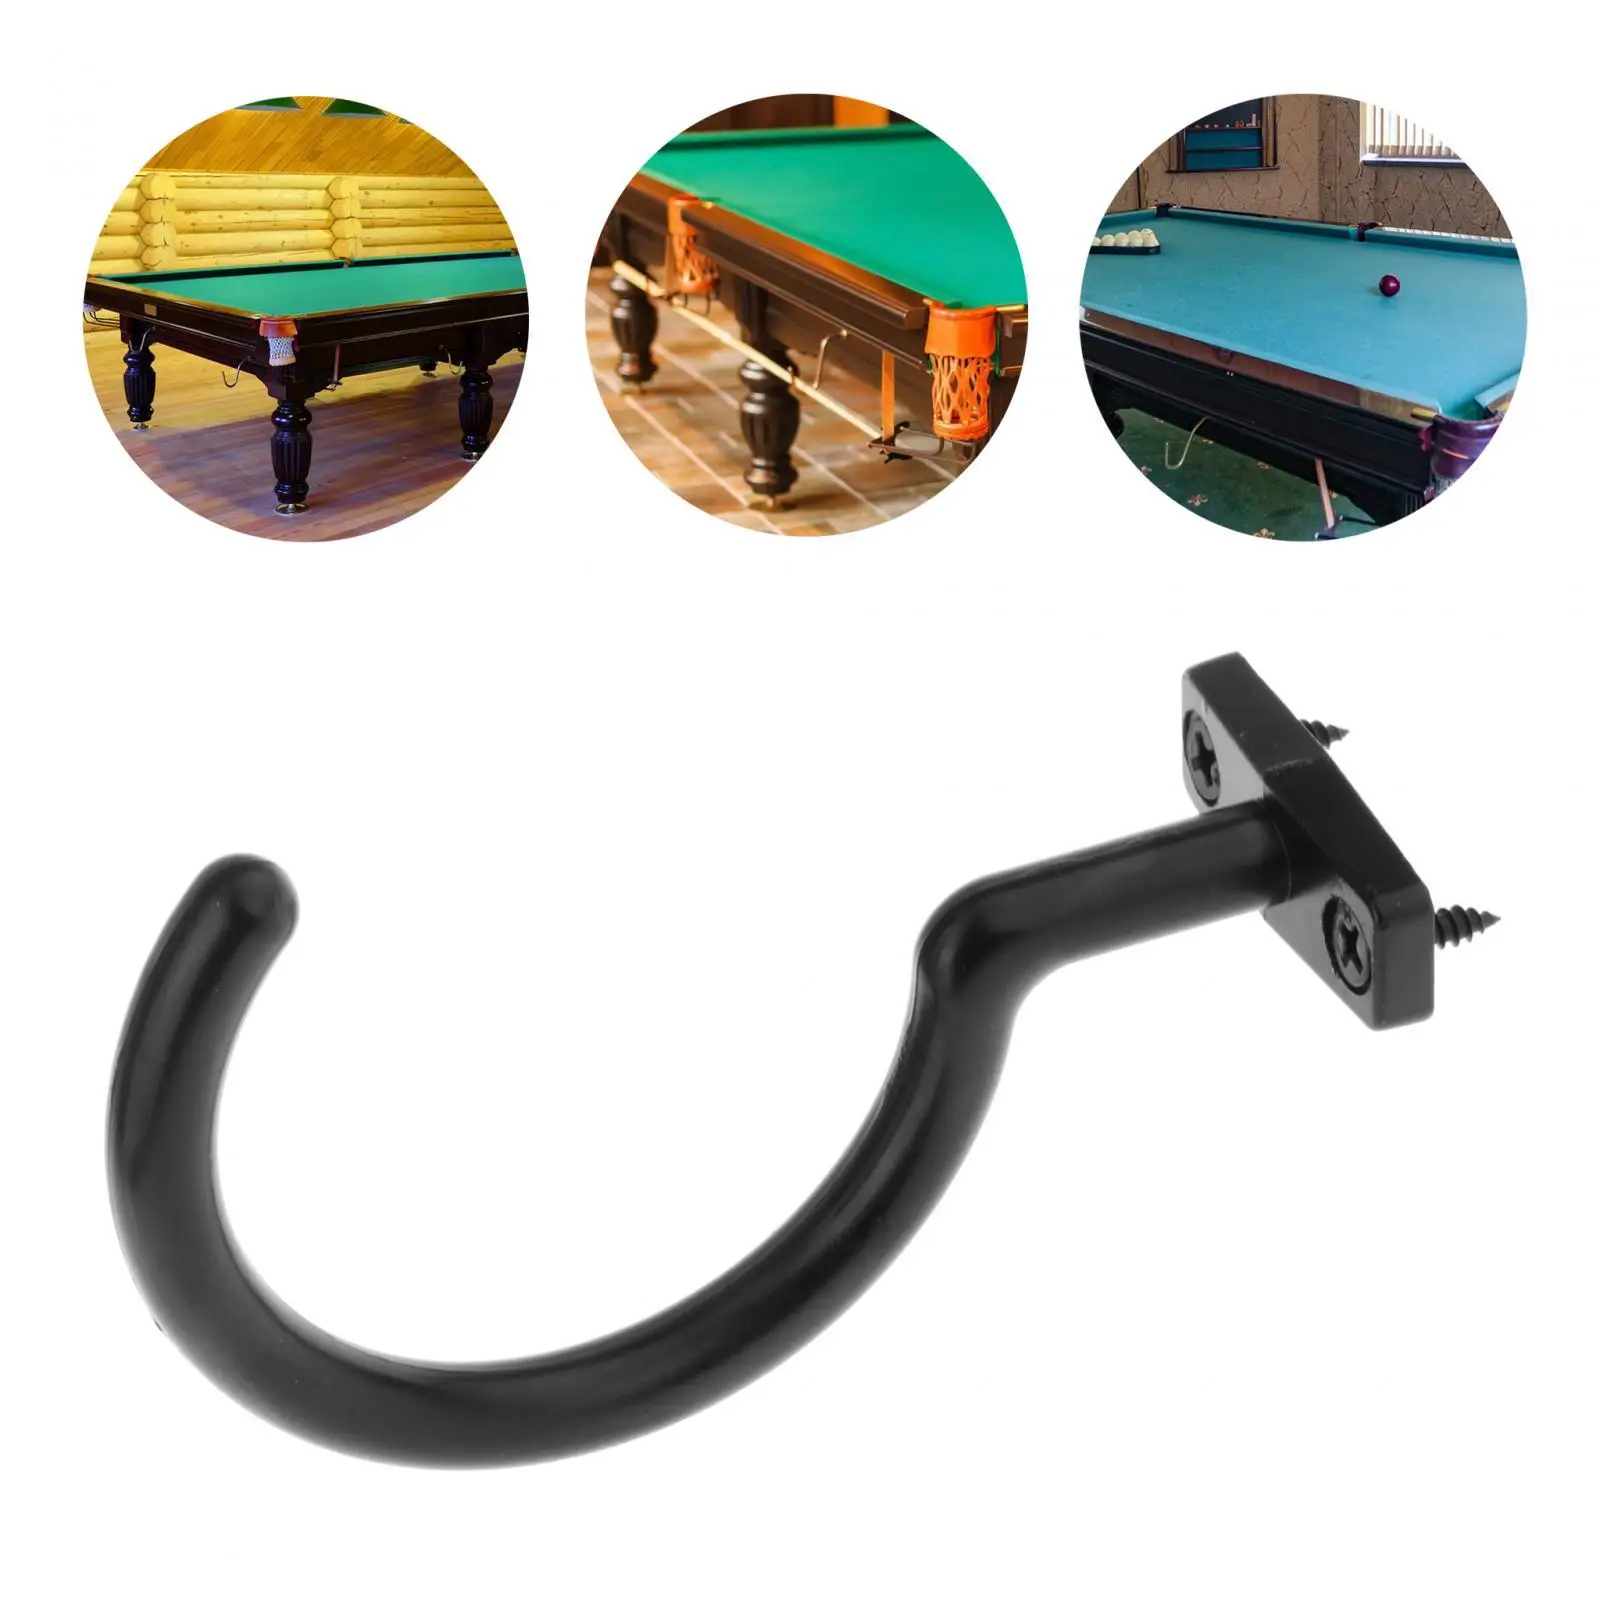 Snooker Billiard Table Board Cue Hook with Mounting Screws Pool Table Rack for Indoor Games Billiard Snooker Tables Accessories